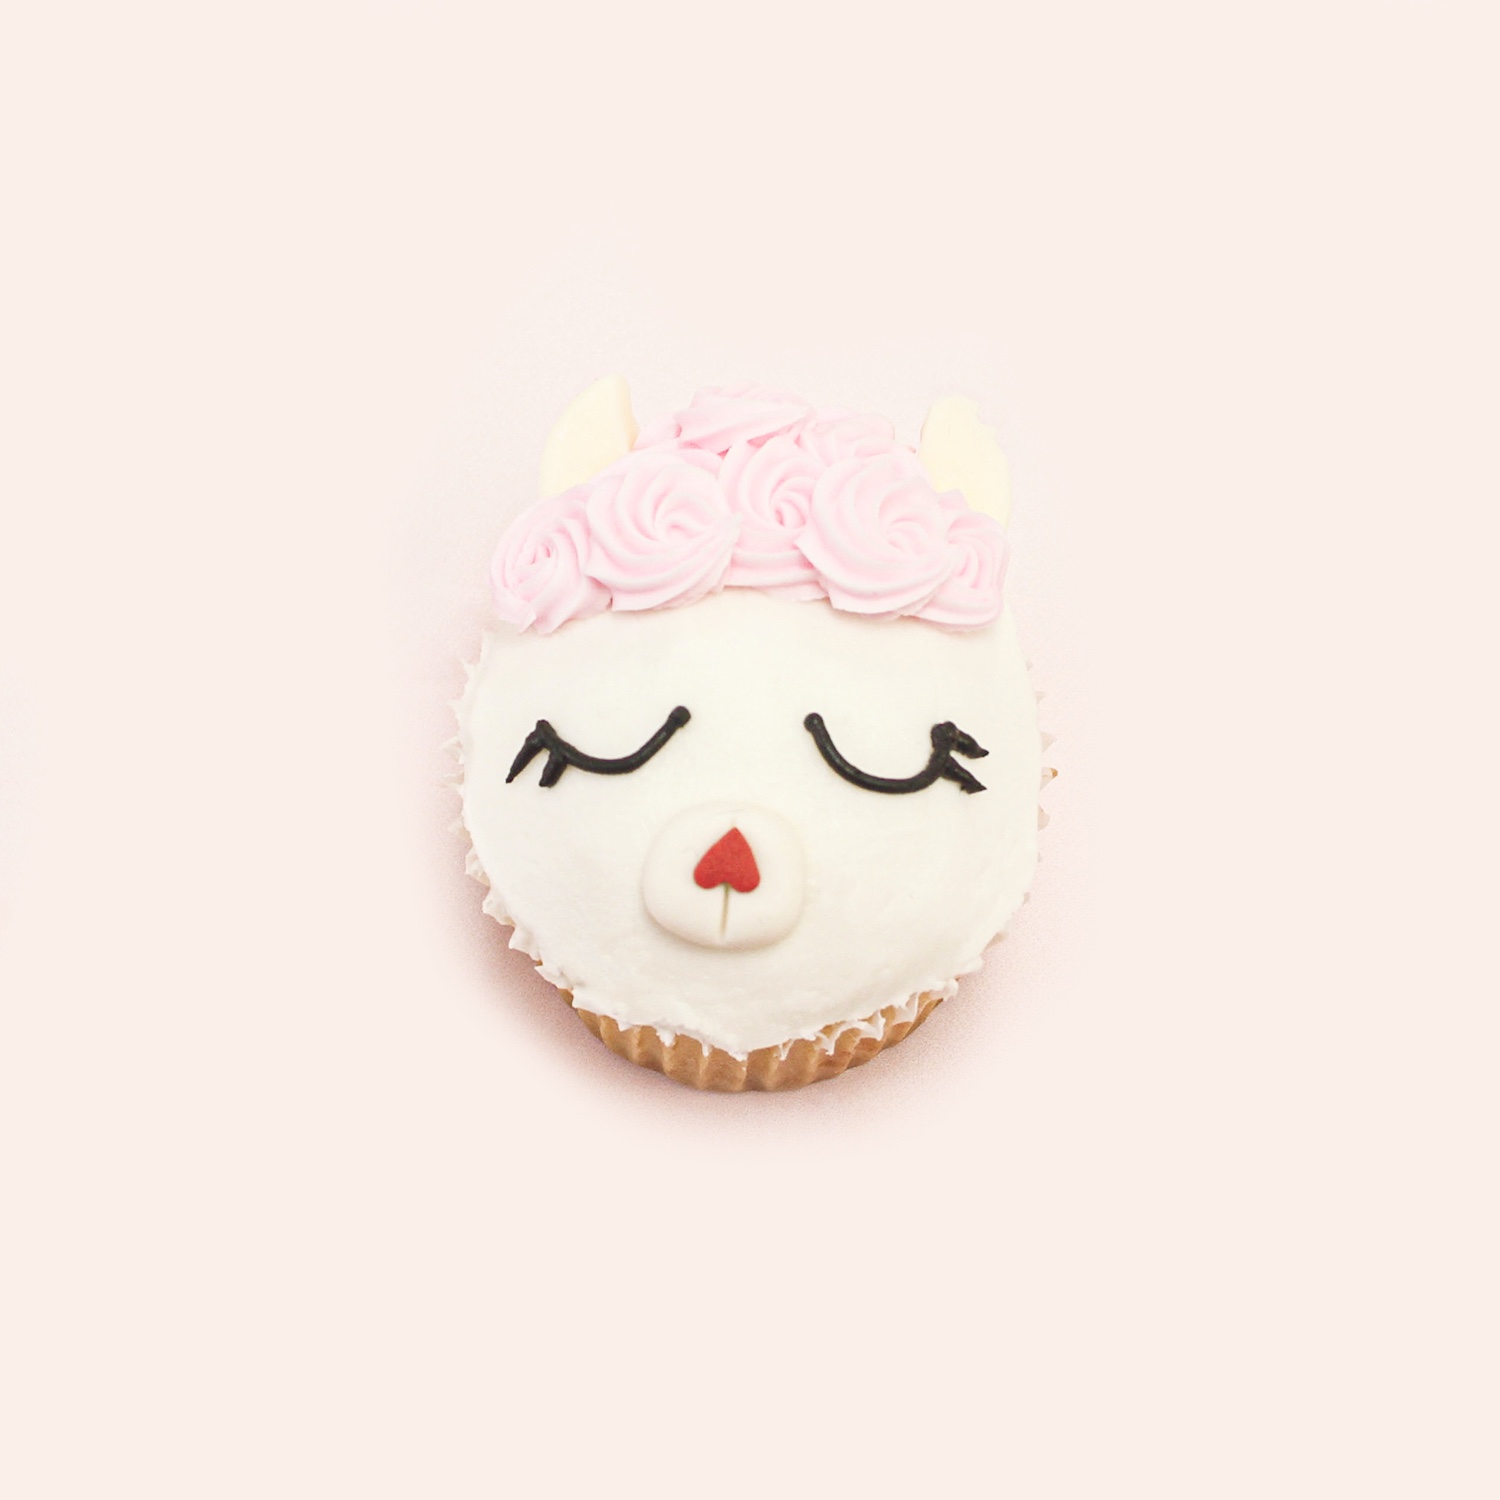 Llama Love Cupcake with buttercream swirl hair and sprinkle heart nose